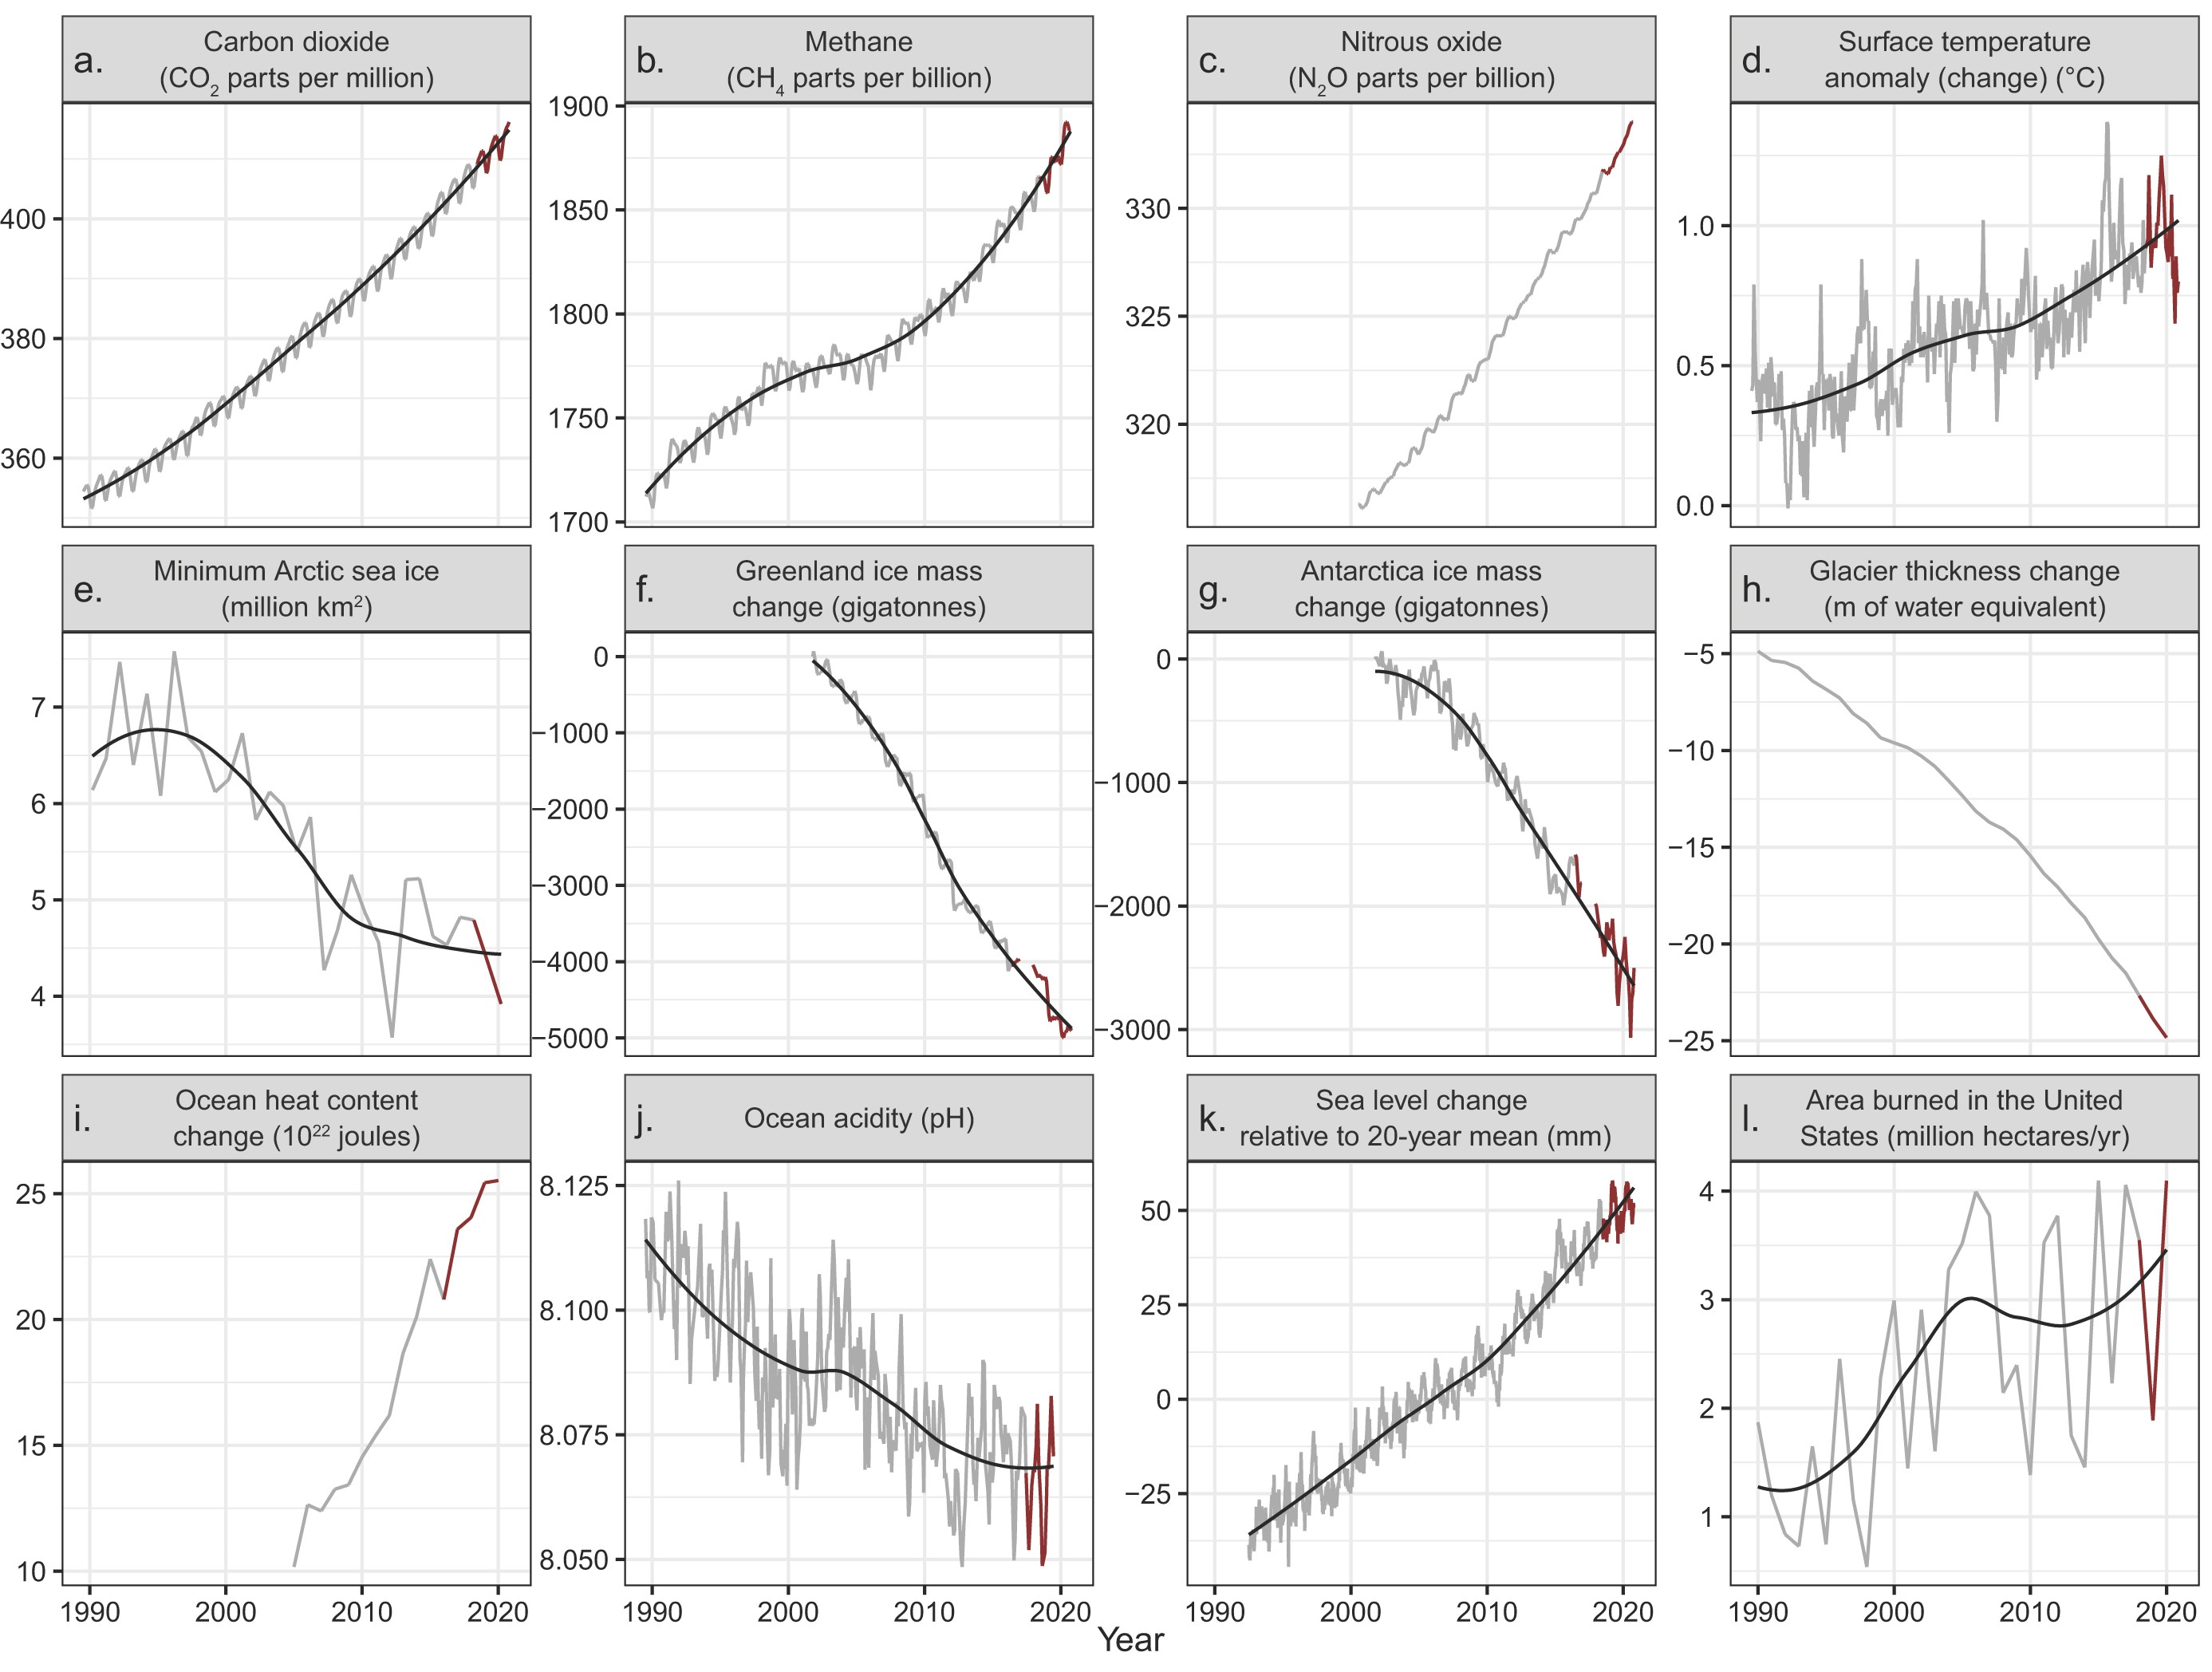 Time series of climate-related responses to anthropogenic drivers, 1990-2020. Out of the 31 tracked planetary vital signs, 18 were at new all-time record lows or highs in 2020. Data obtained before and after the publication of Ripple and colleagues (2020) are shown in gray and red respectively. For variables with relatively high variability, local regression trend lines are shown in black. The variables were measured at various frequencies (e.g., annual, monthly, weekly). The labels on the x-axis correspond to midpoints of years. Sources and additional details about each variable are provided in the supplemental material. Graphic: Ripple, et al., 2021 / BioScience